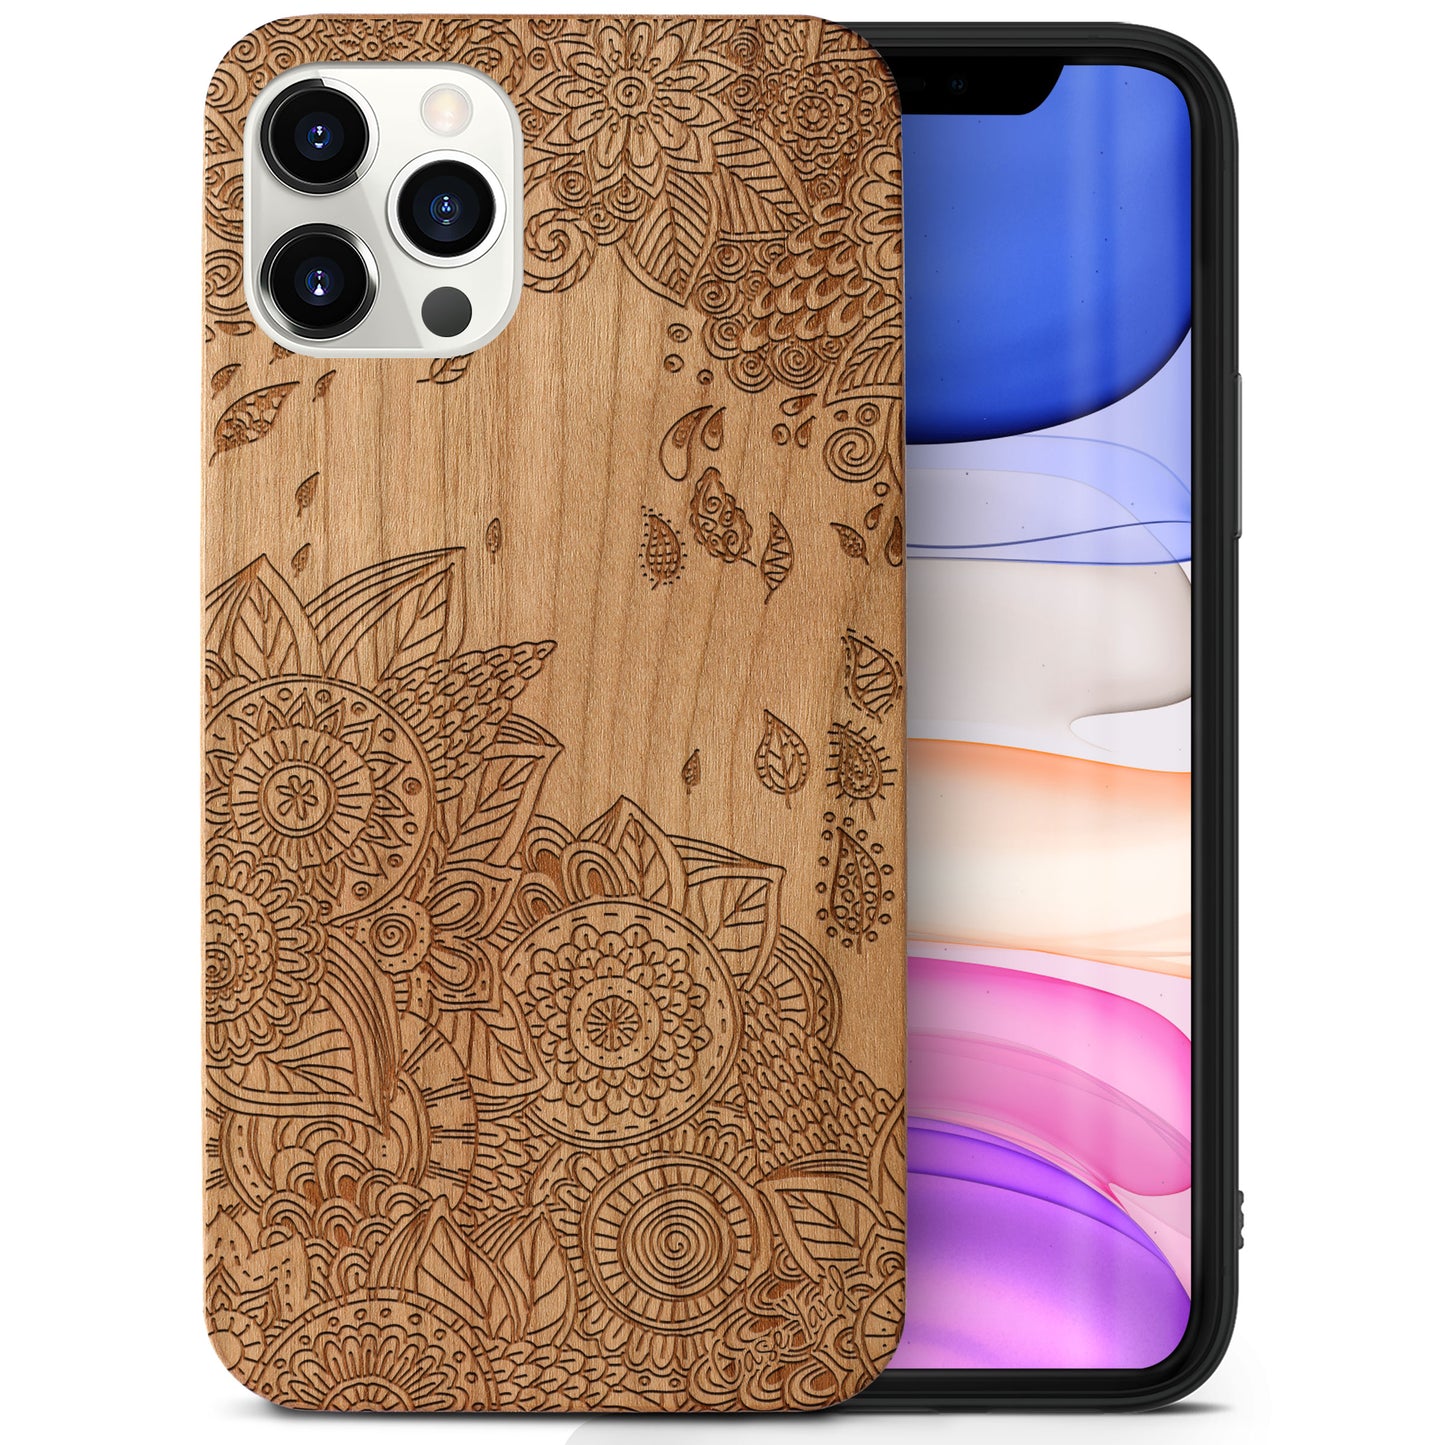 Wooden Cell Phone Case Cover, Laser Engraved case for iPhone & Samsung phone Wind Flowers Wood Design